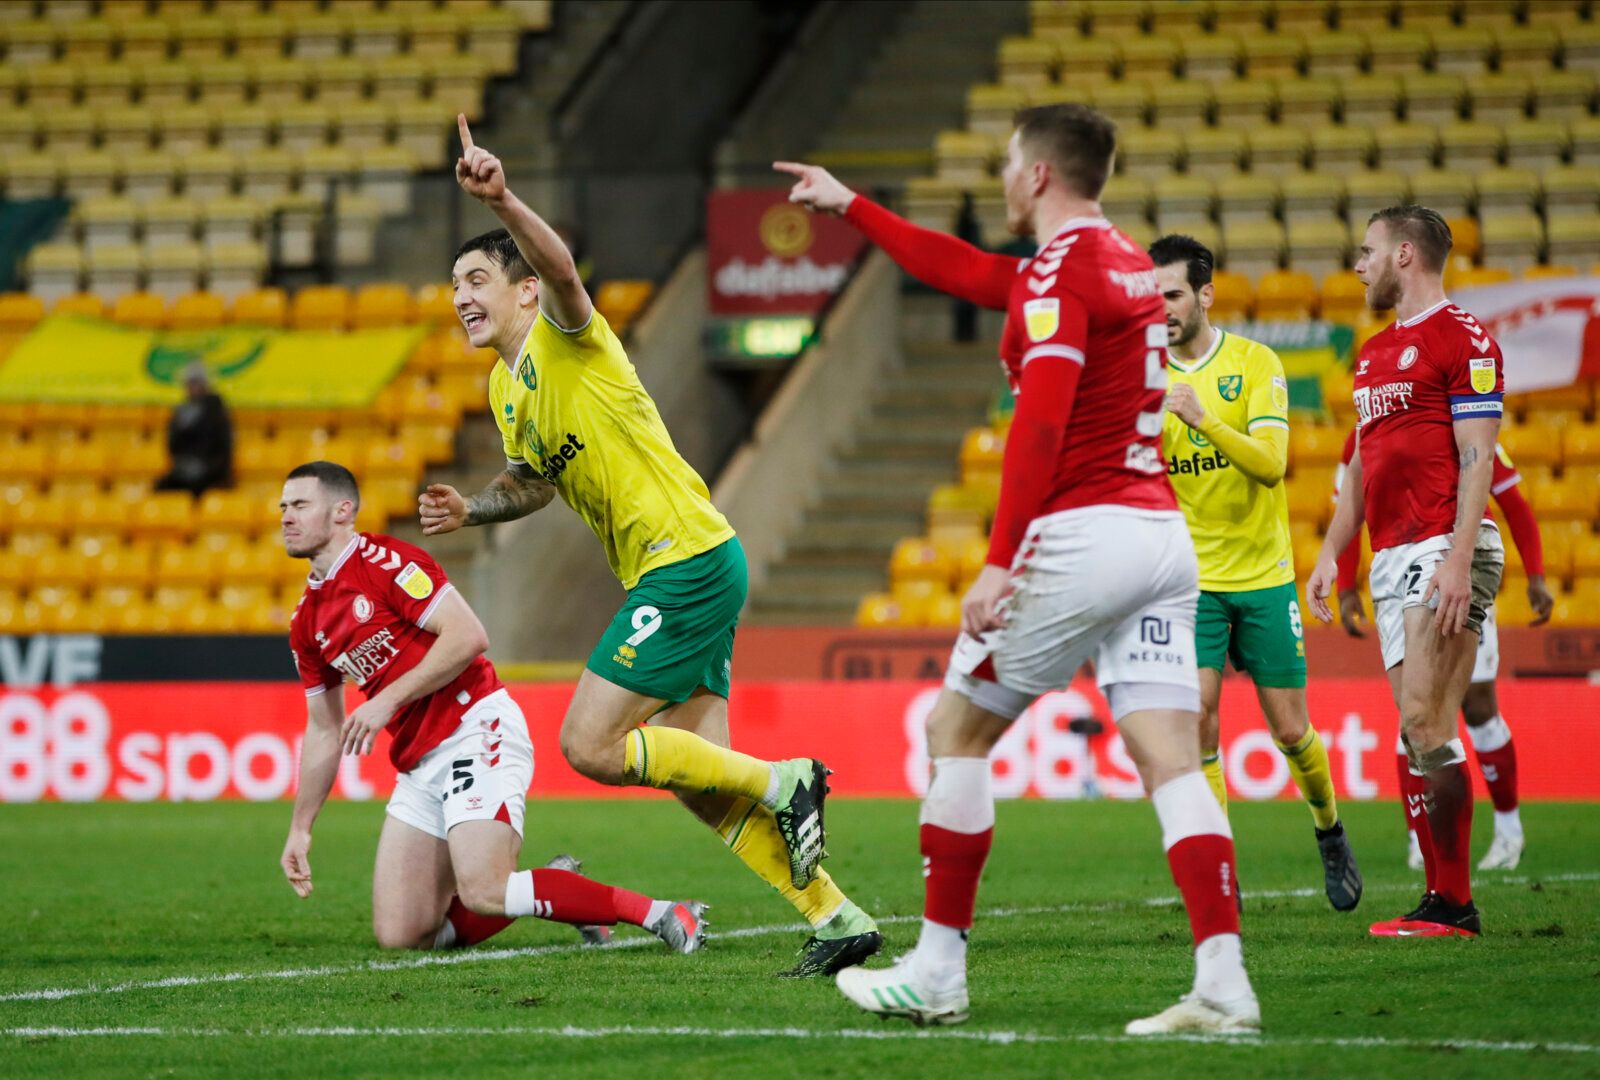 Soccer Football - Championship - Norwich City v Bristol City - Carrow Road, Norwich, Britain - January 20, 2021  Norwich City's Jordan Hugill celebrates scoring their second goal Action Images/Paul Childs EDITORIAL USE ONLY. No use with unauthorized audio, video, data, fixture lists, club/league logos or 'live' services. Online in-match use limited to 75 images, no video emulation. No use in betting, games or single club /league/player publications.  Please contact your account representative fo